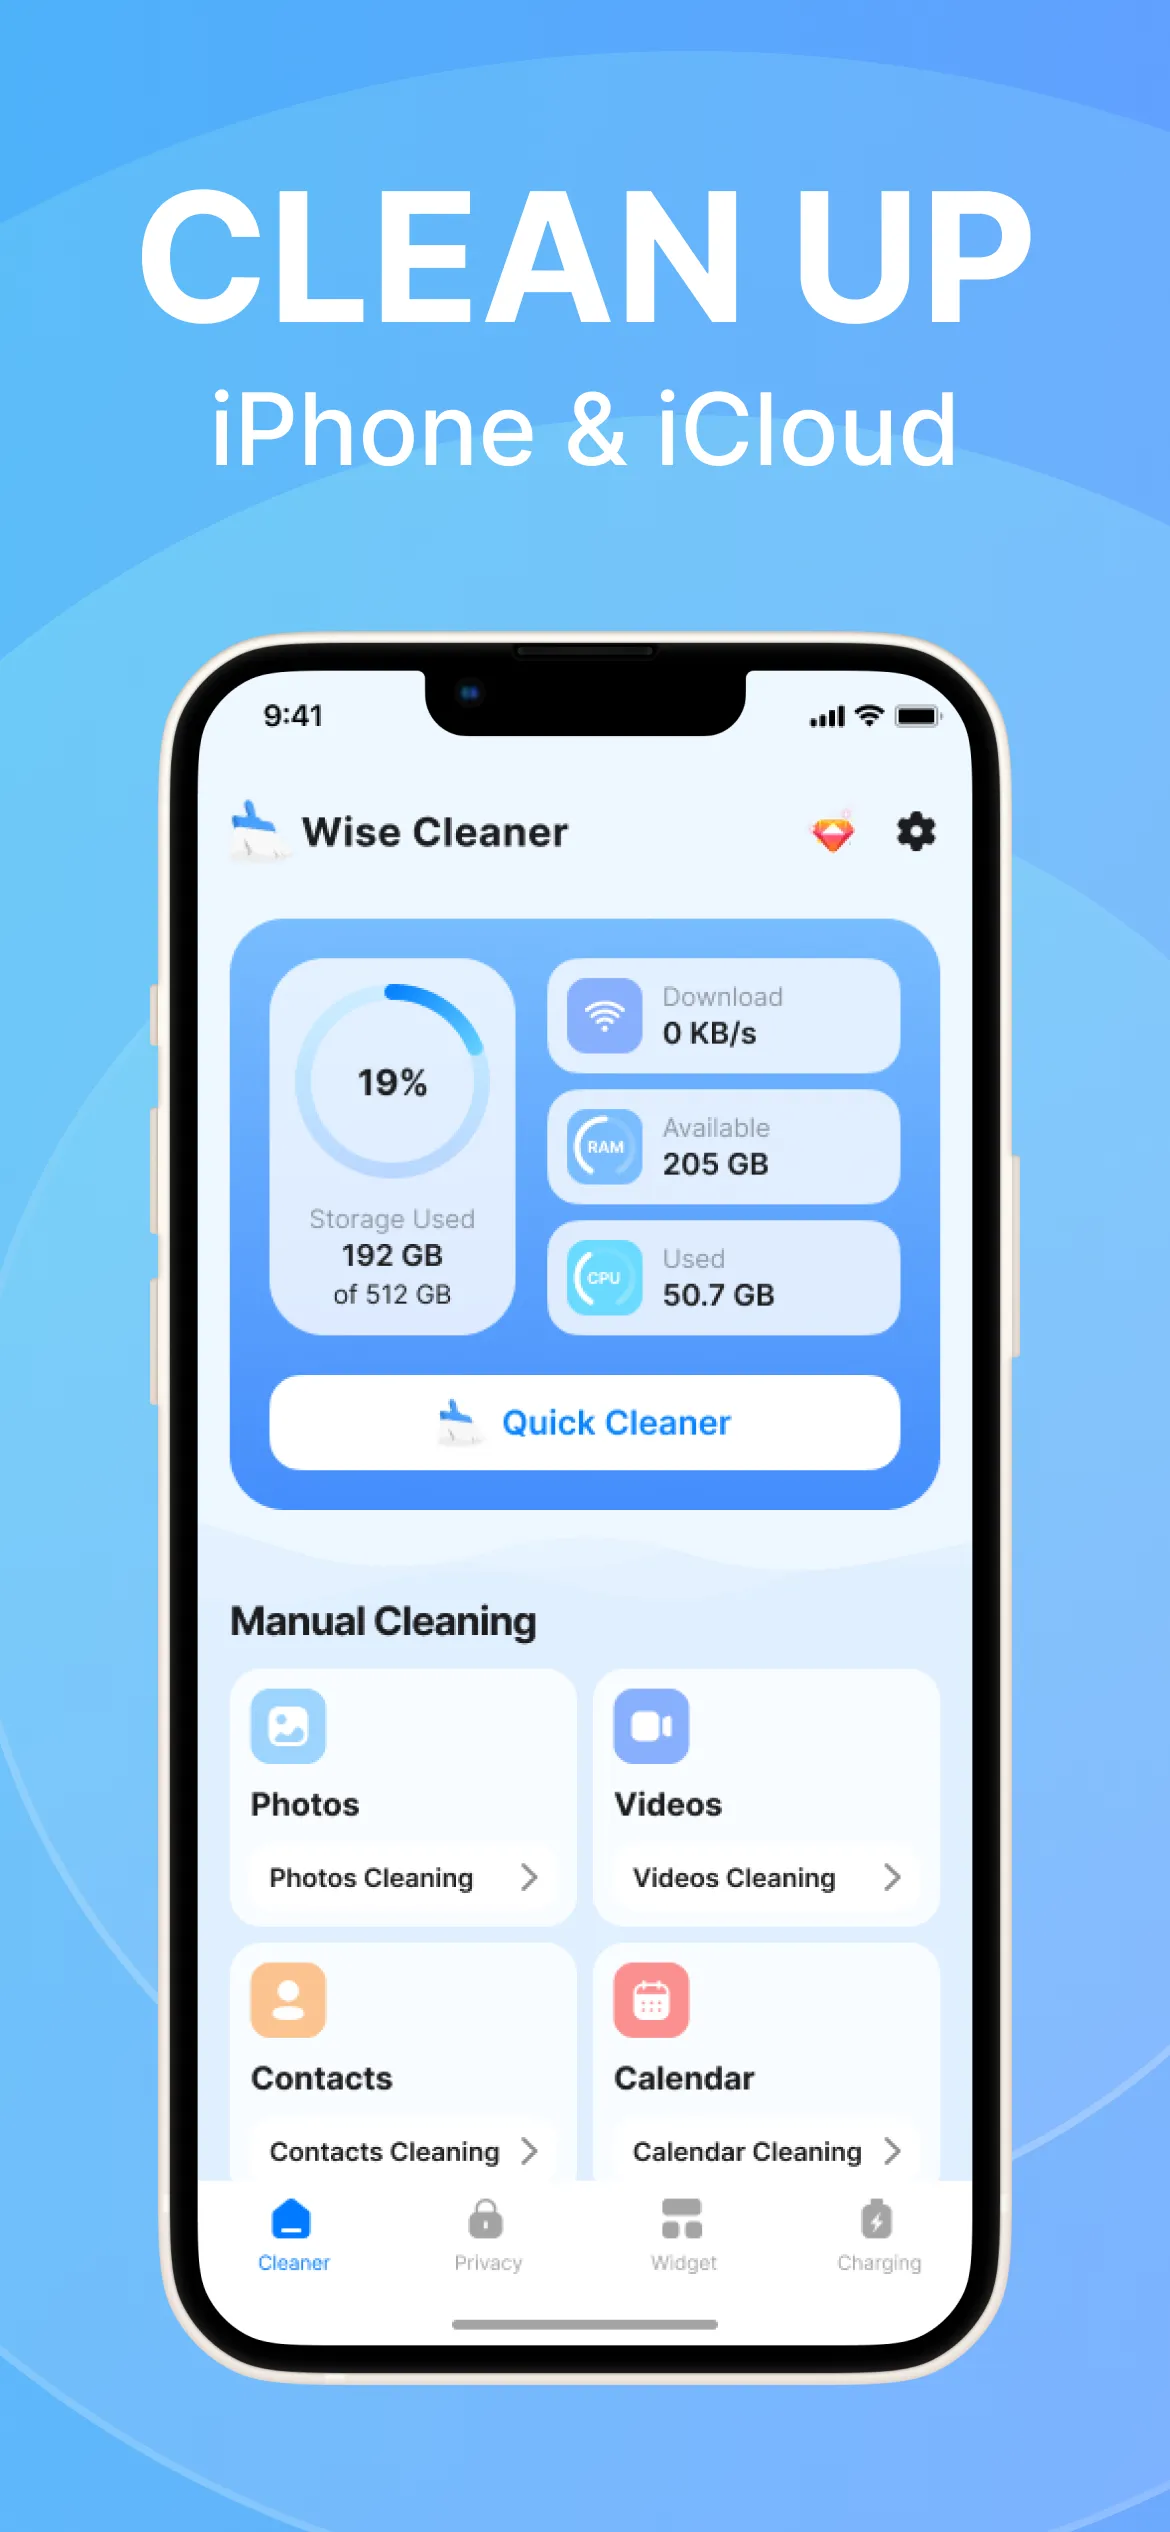 Clean up iPhone and iCloud